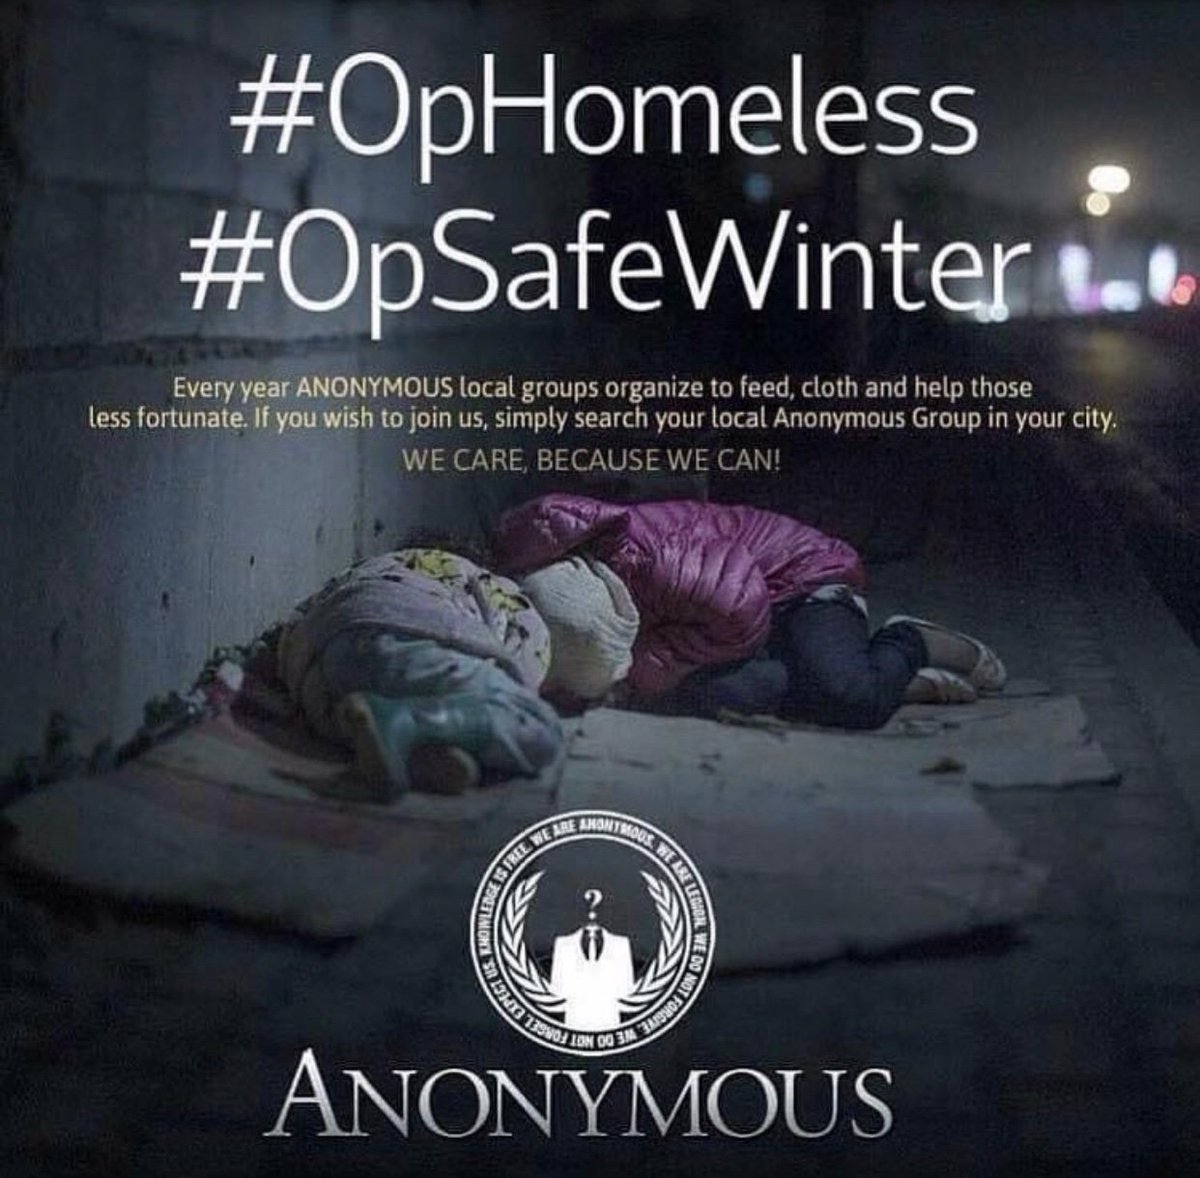 #Anonymous #OpSafeWinter #homelessness #HelpTheHomeless 

Worst time of year to be sleeping outside for #homeless people. Please help if you can, give a hot drink, cloth, blanket, give some change, say hello 🫂
And please respect their dignity, don't make photos.
Thank you 🙏❤️🫂